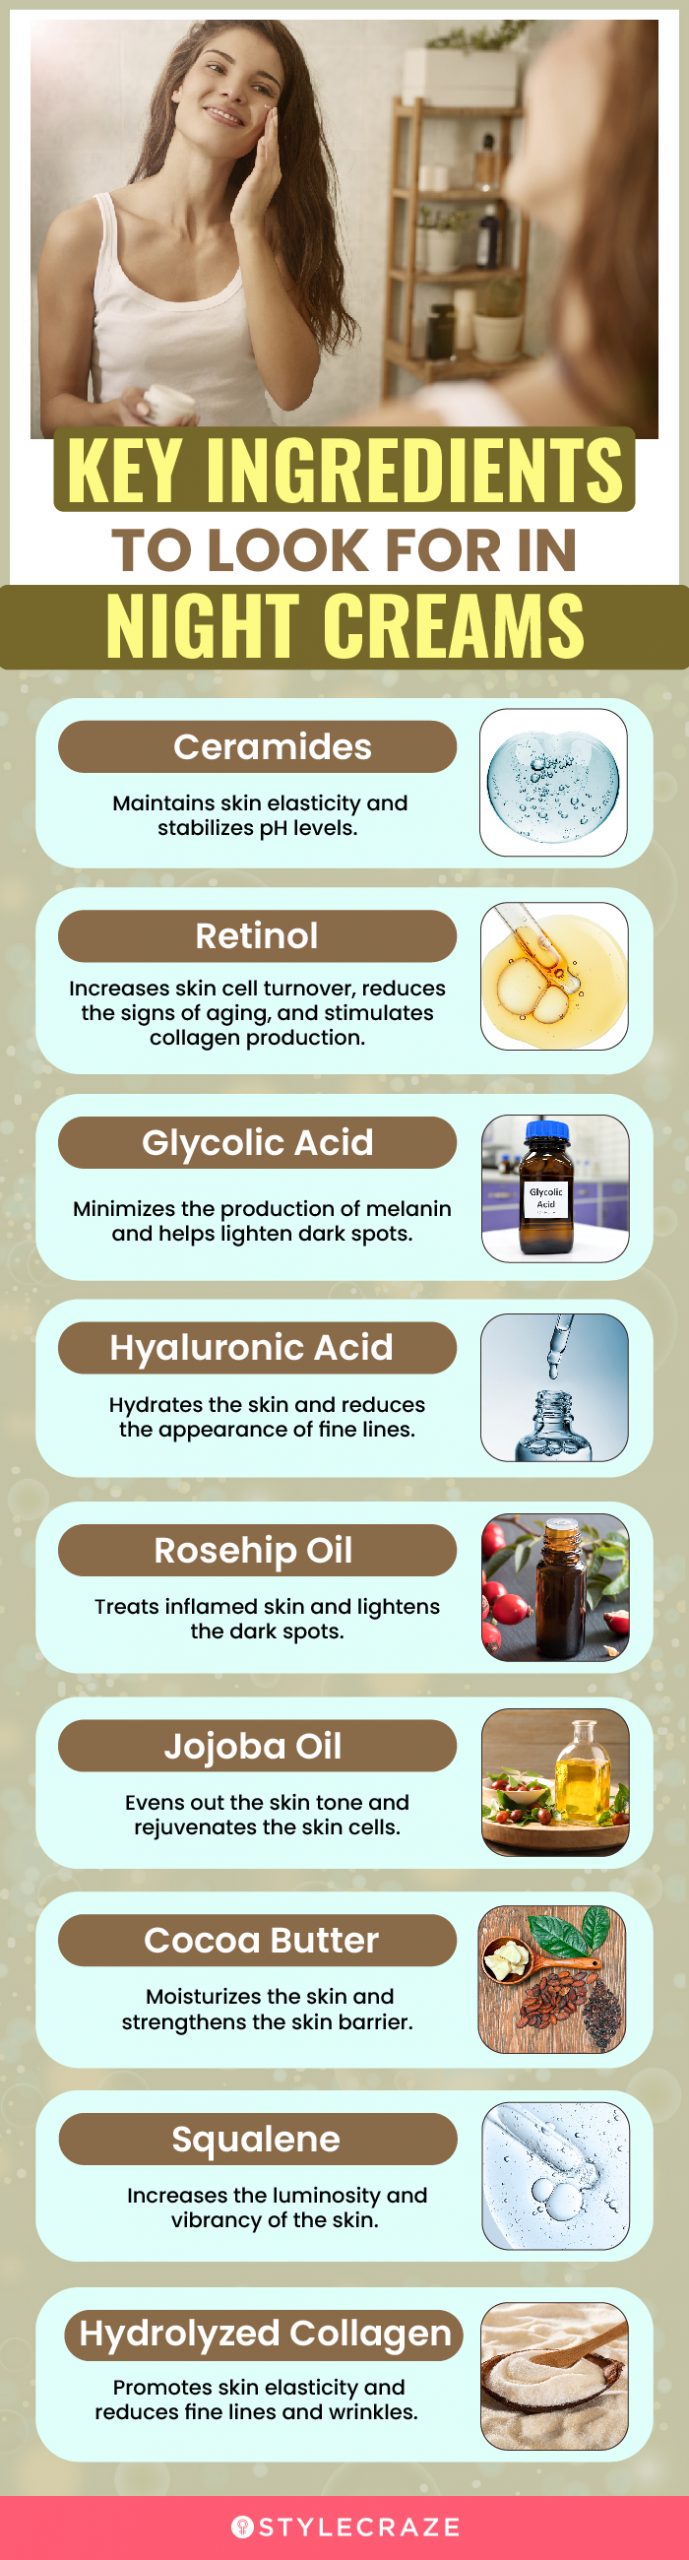 Key Ingredients To Look For In Night Creams (infographic)